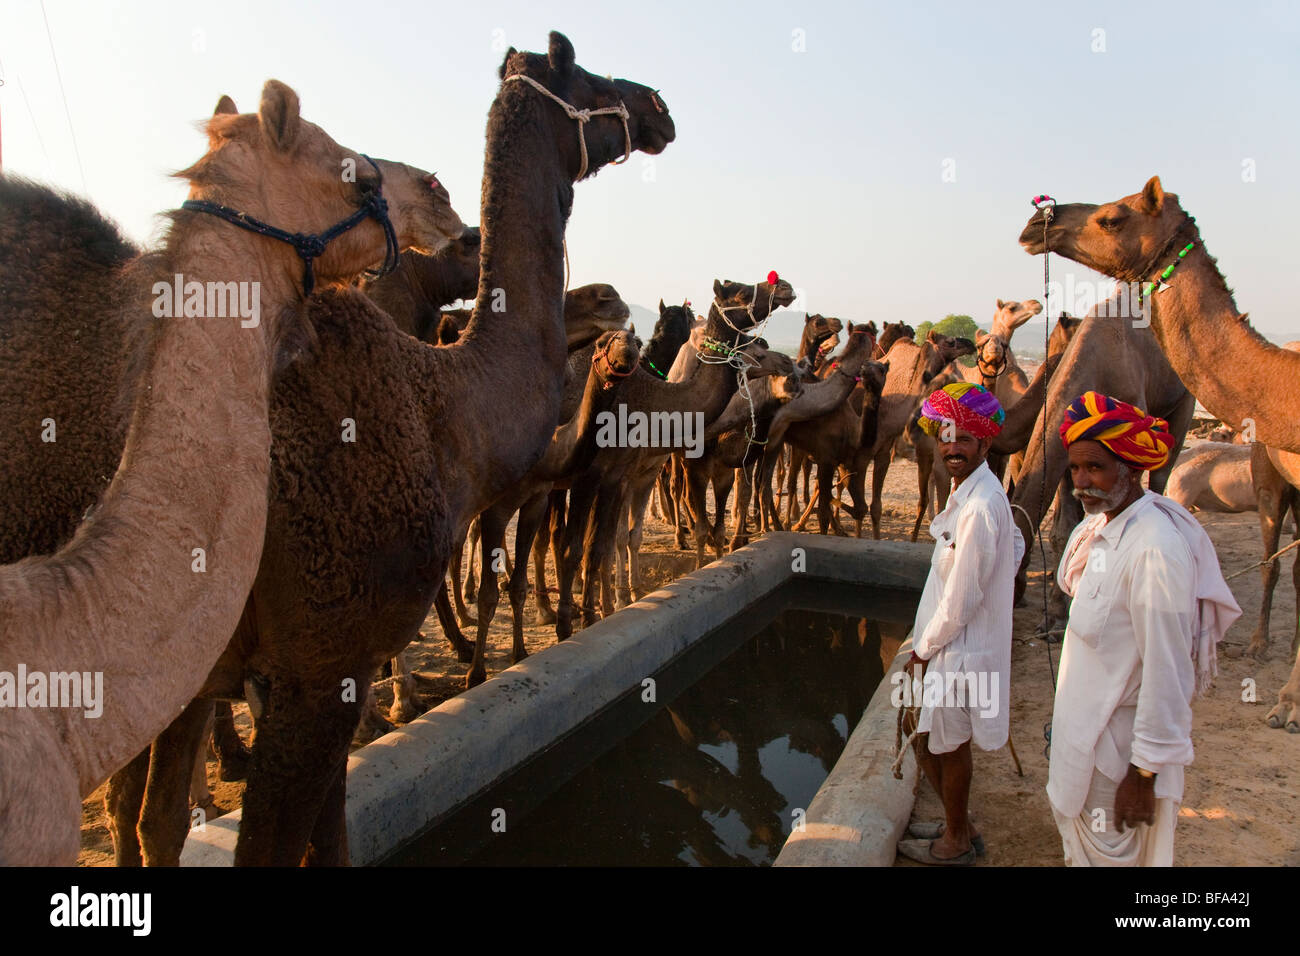 Camels around a watering trough at the Camel Fair in Pushkar India Stock Photo